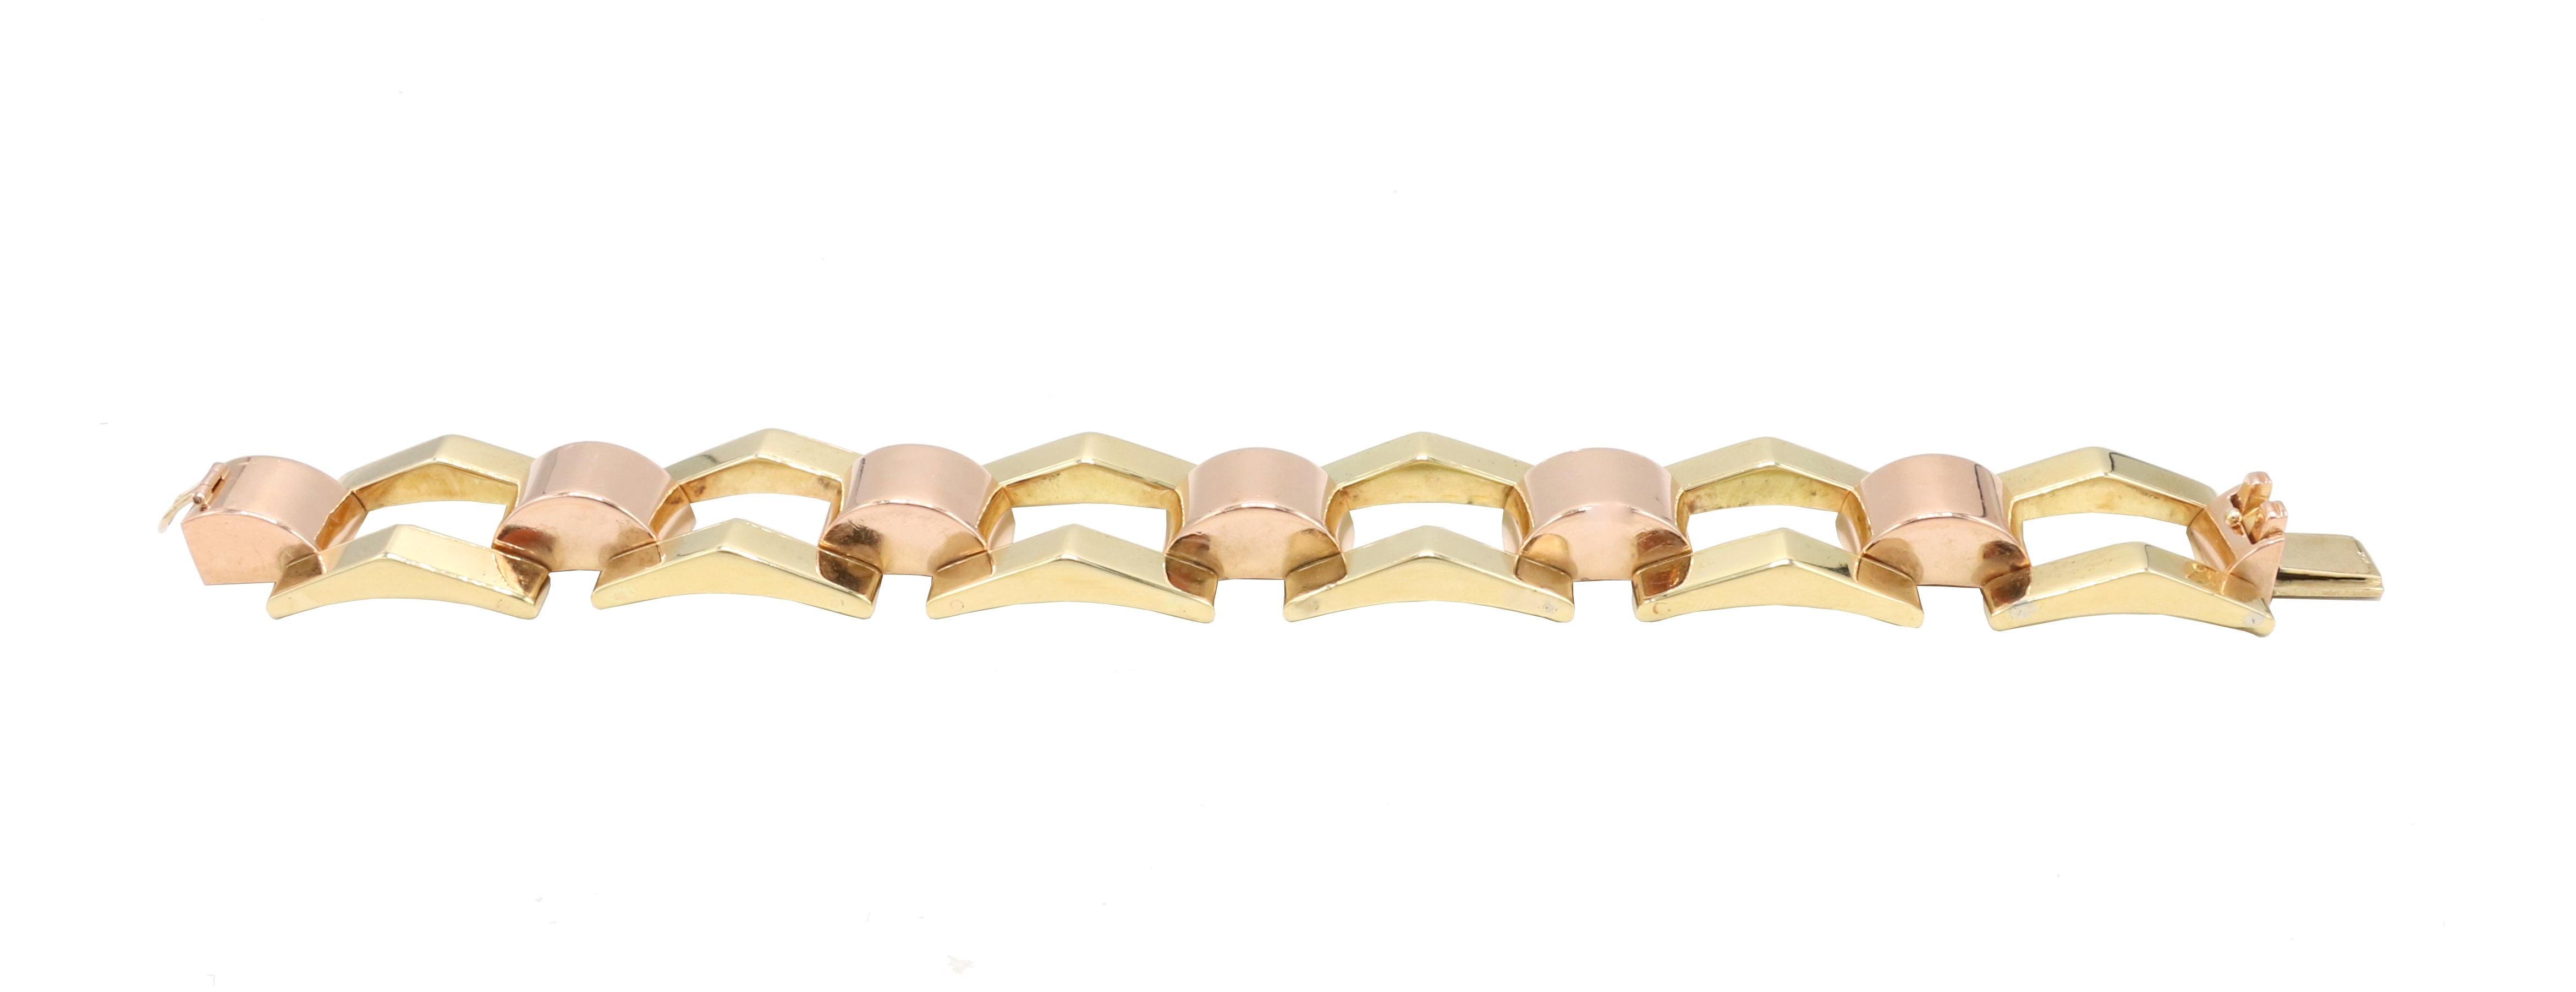 Tiffany & Co. Retro Pink & Yellow 14 Karat Gold Link Bracelet 
Metal: 14k yellow gold
Weight: 57.6 grams
Length: 7 inches
Width: 21.5mm
Signed: Tiffany & Co. 14K
